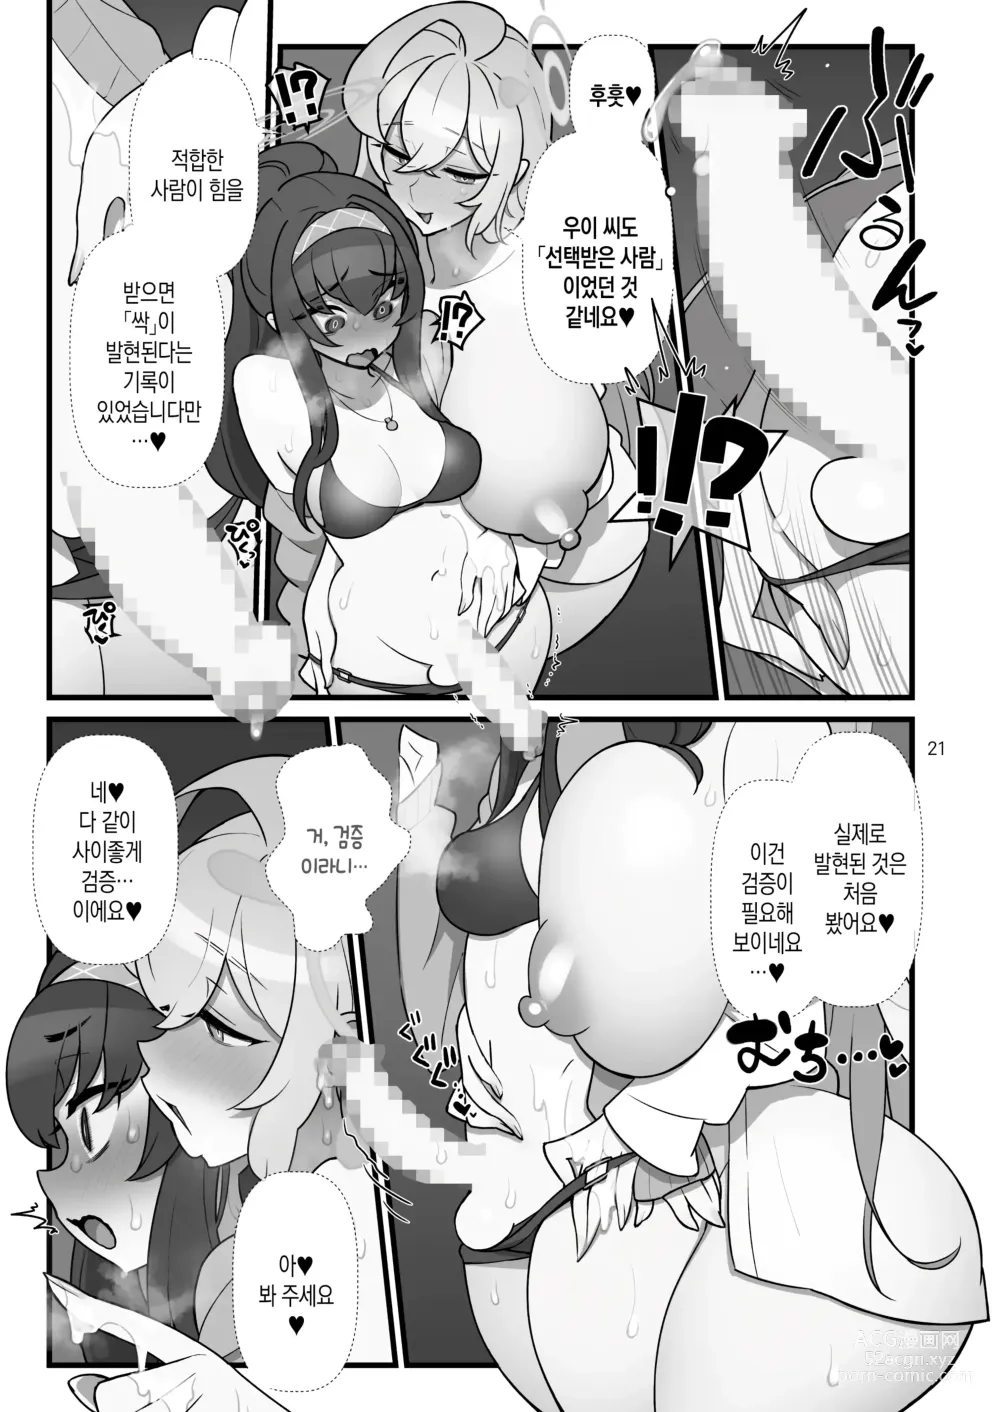 Page 22 of doujinshi 코하루 후타나루